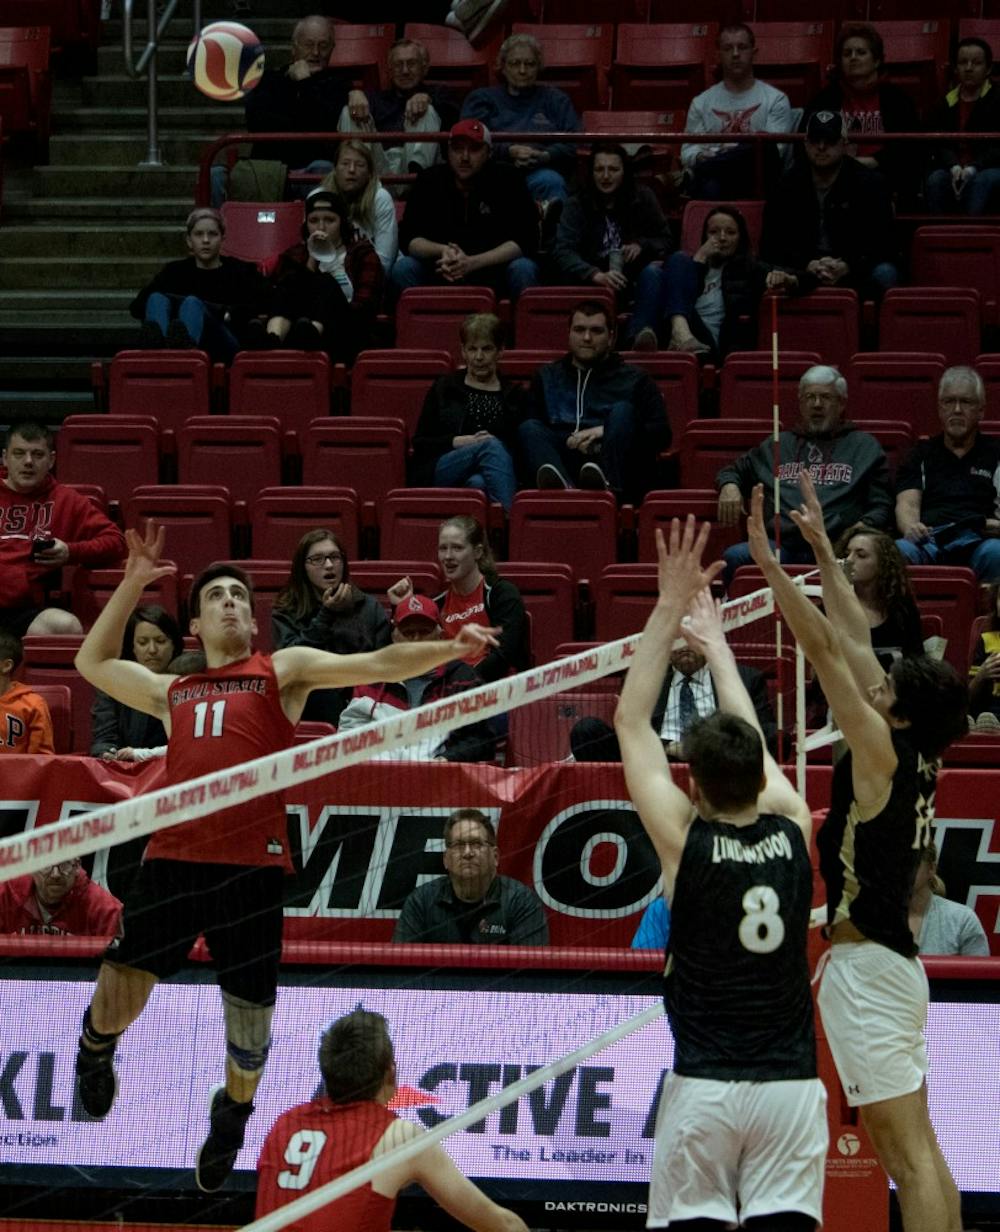 <p>Senior Mitch Weiler spikes the ball over the net during the game against Lindenwood University on March 30 at John E. Worthen Arena. Weiler had one ace during the game. <strong>Rebecca Slezak, DN</strong></p>